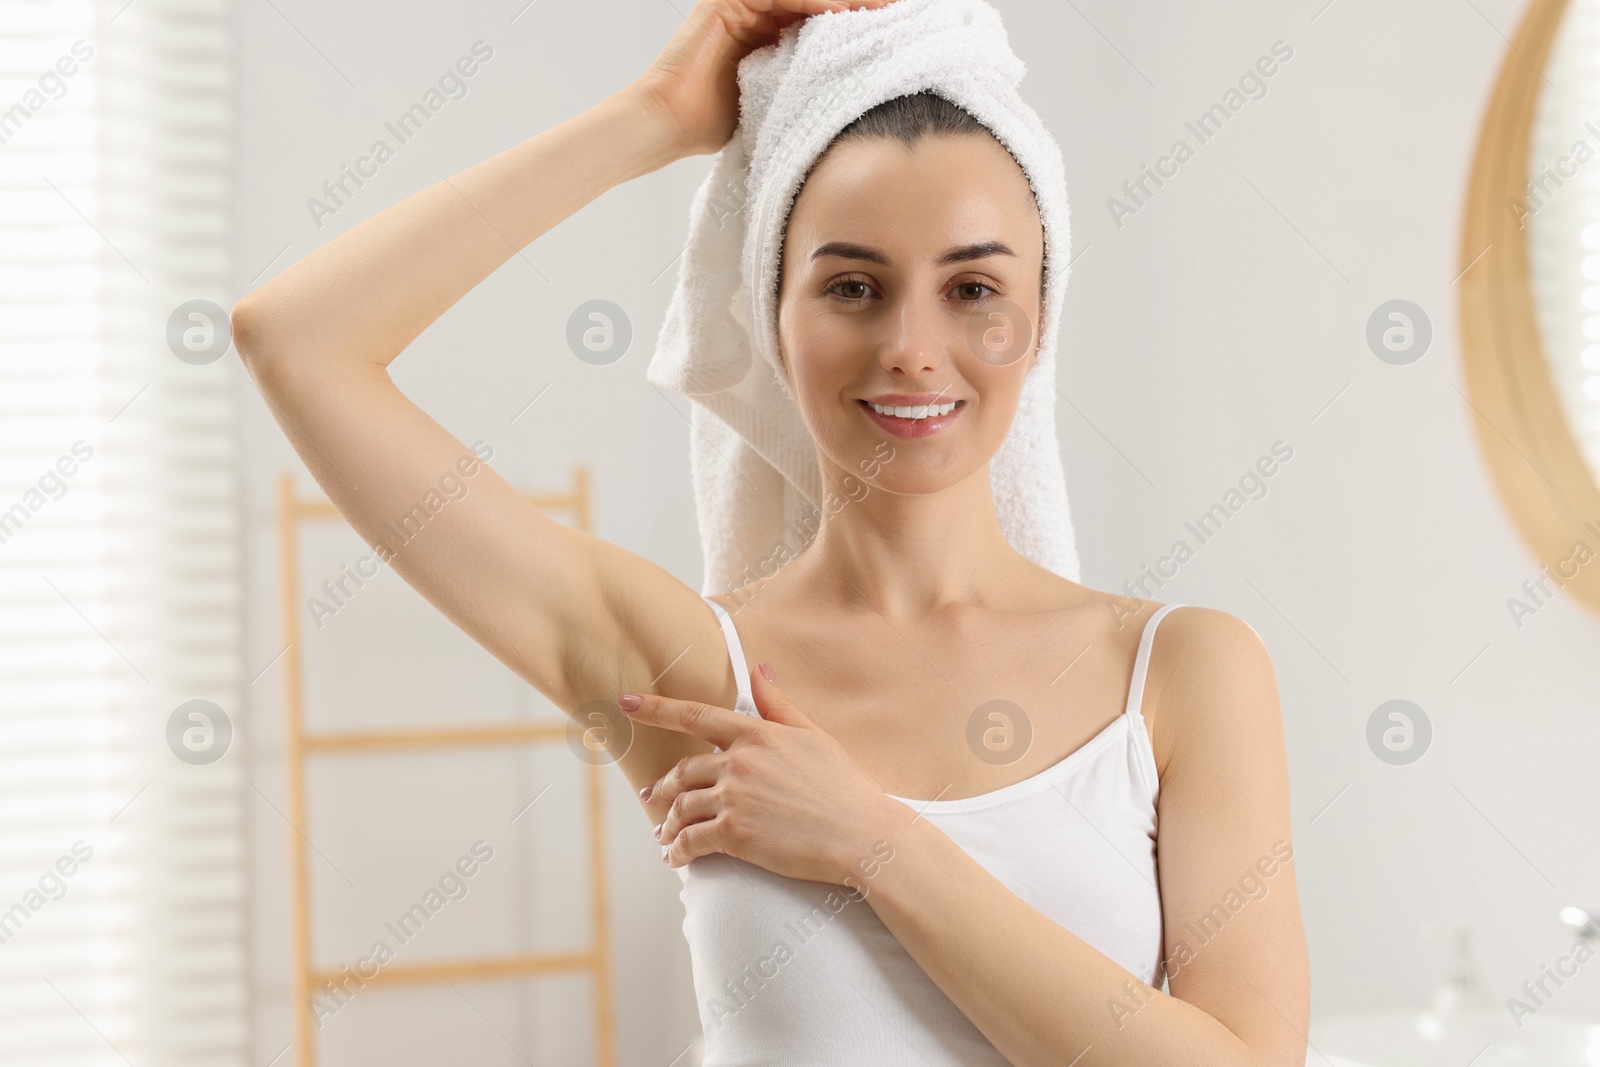 Photo of Beautiful woman showing armpit with smooth clean skin in bathroom